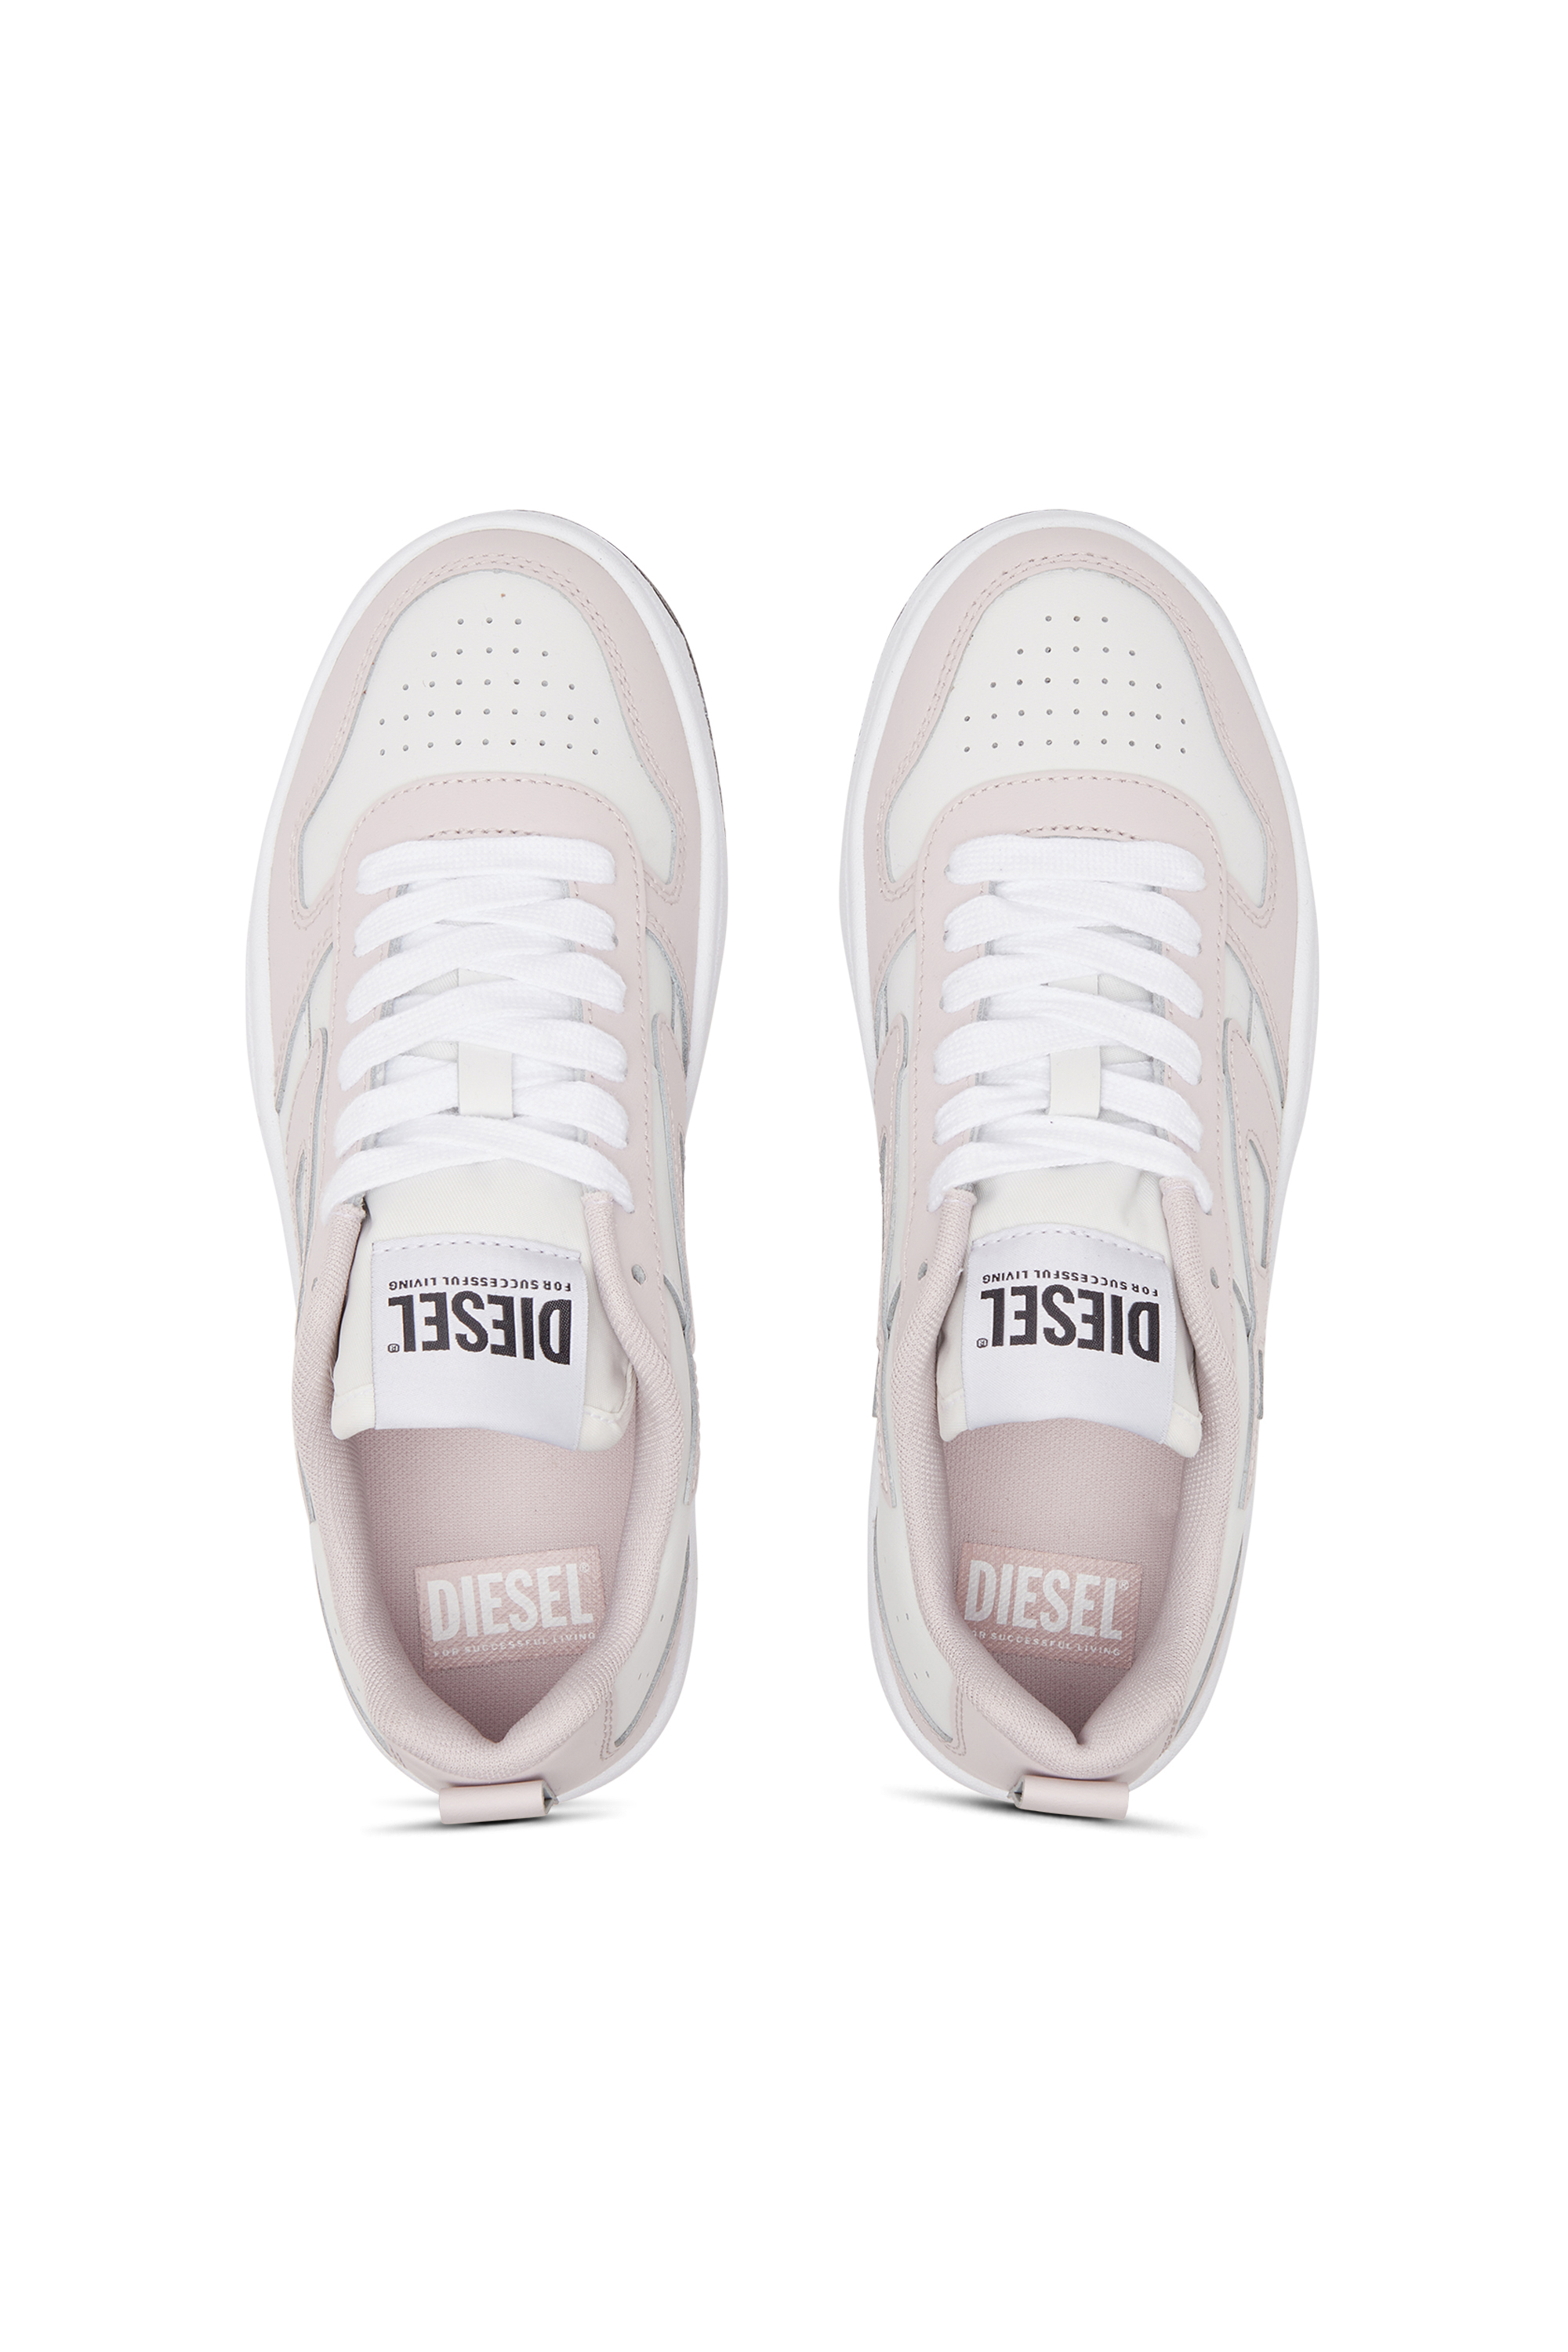 Diesel - S-UKIYO V2 LOW W, Woman S-Ukiyo Low-Low-top sneakers in leather and nylon in Multicolor - Image 5